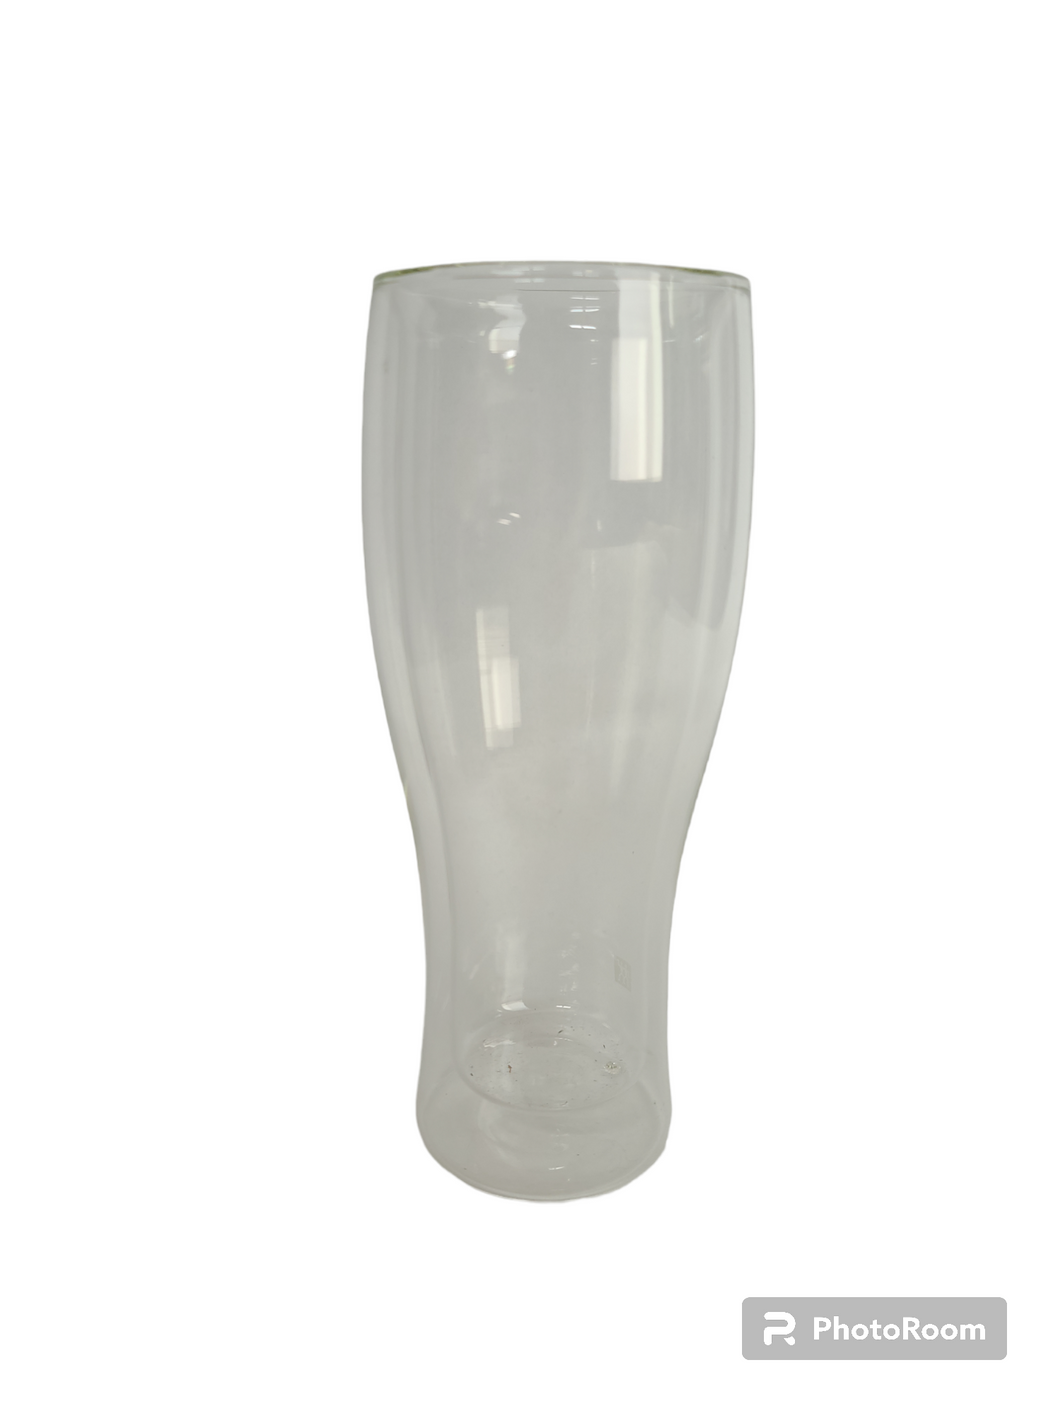 Double Walled Beer Glass